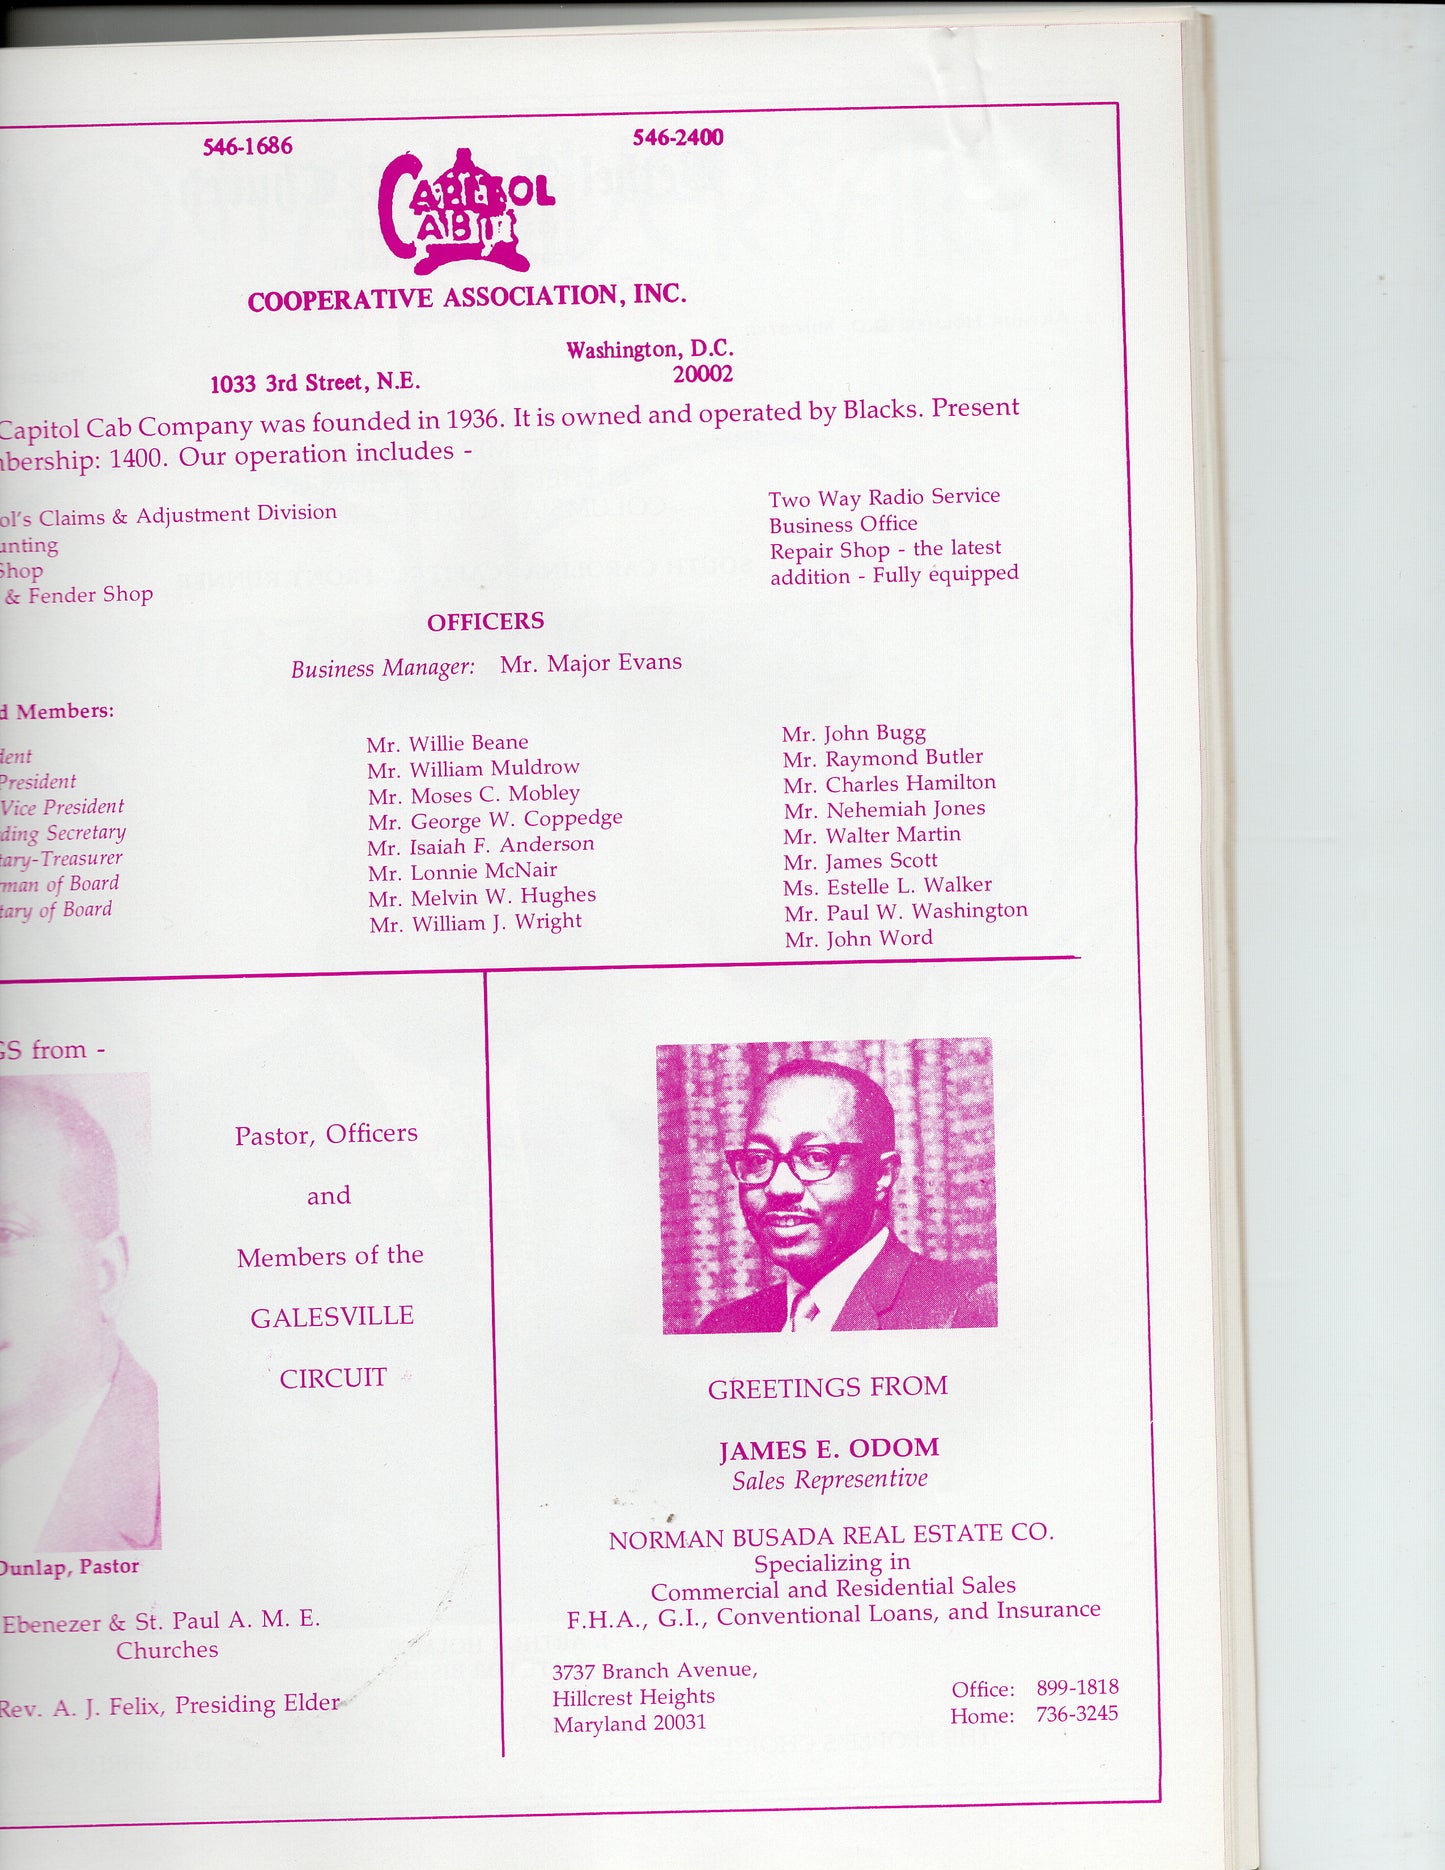 07 06 1975 Rare book of AME Church Council of Bishops